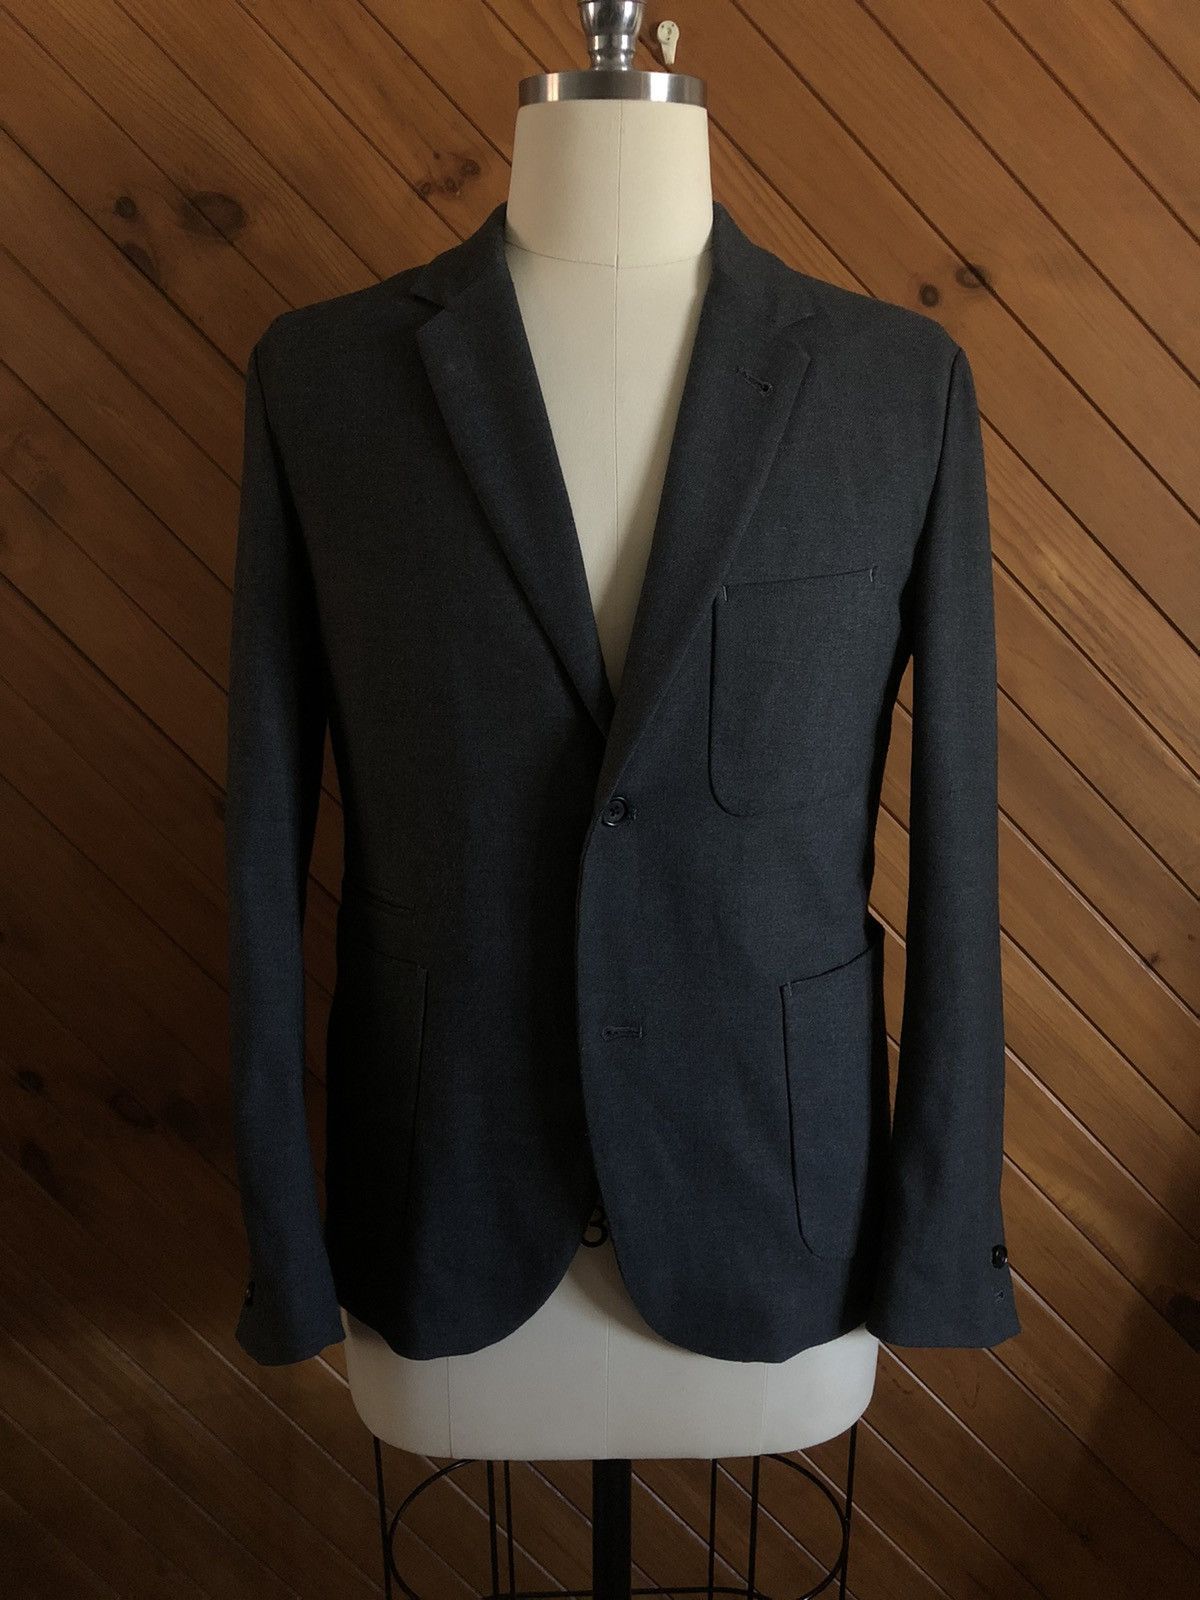 Japanese Brand A vontade / Easy Blazer Jacket / Made in Japan / sz M/L Size 38R - 1 Preview